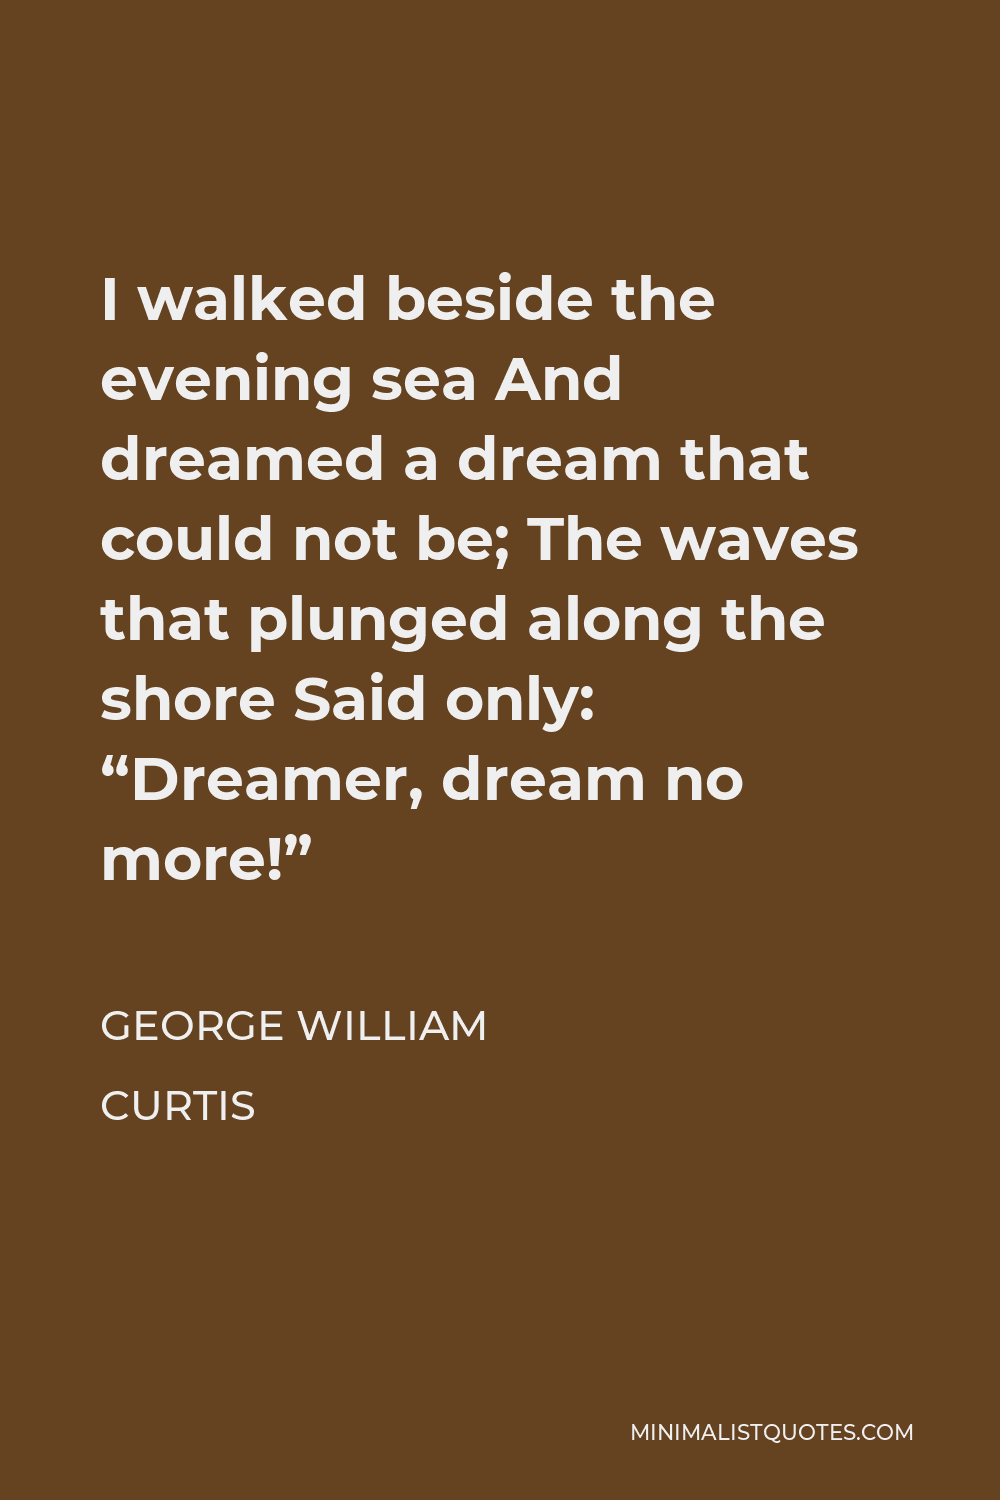 George William Curtis Quote - I walked beside the evening sea And dreamed a dream that could not be; The waves that plunged along the shore Said only: “Dreamer, dream no more!”